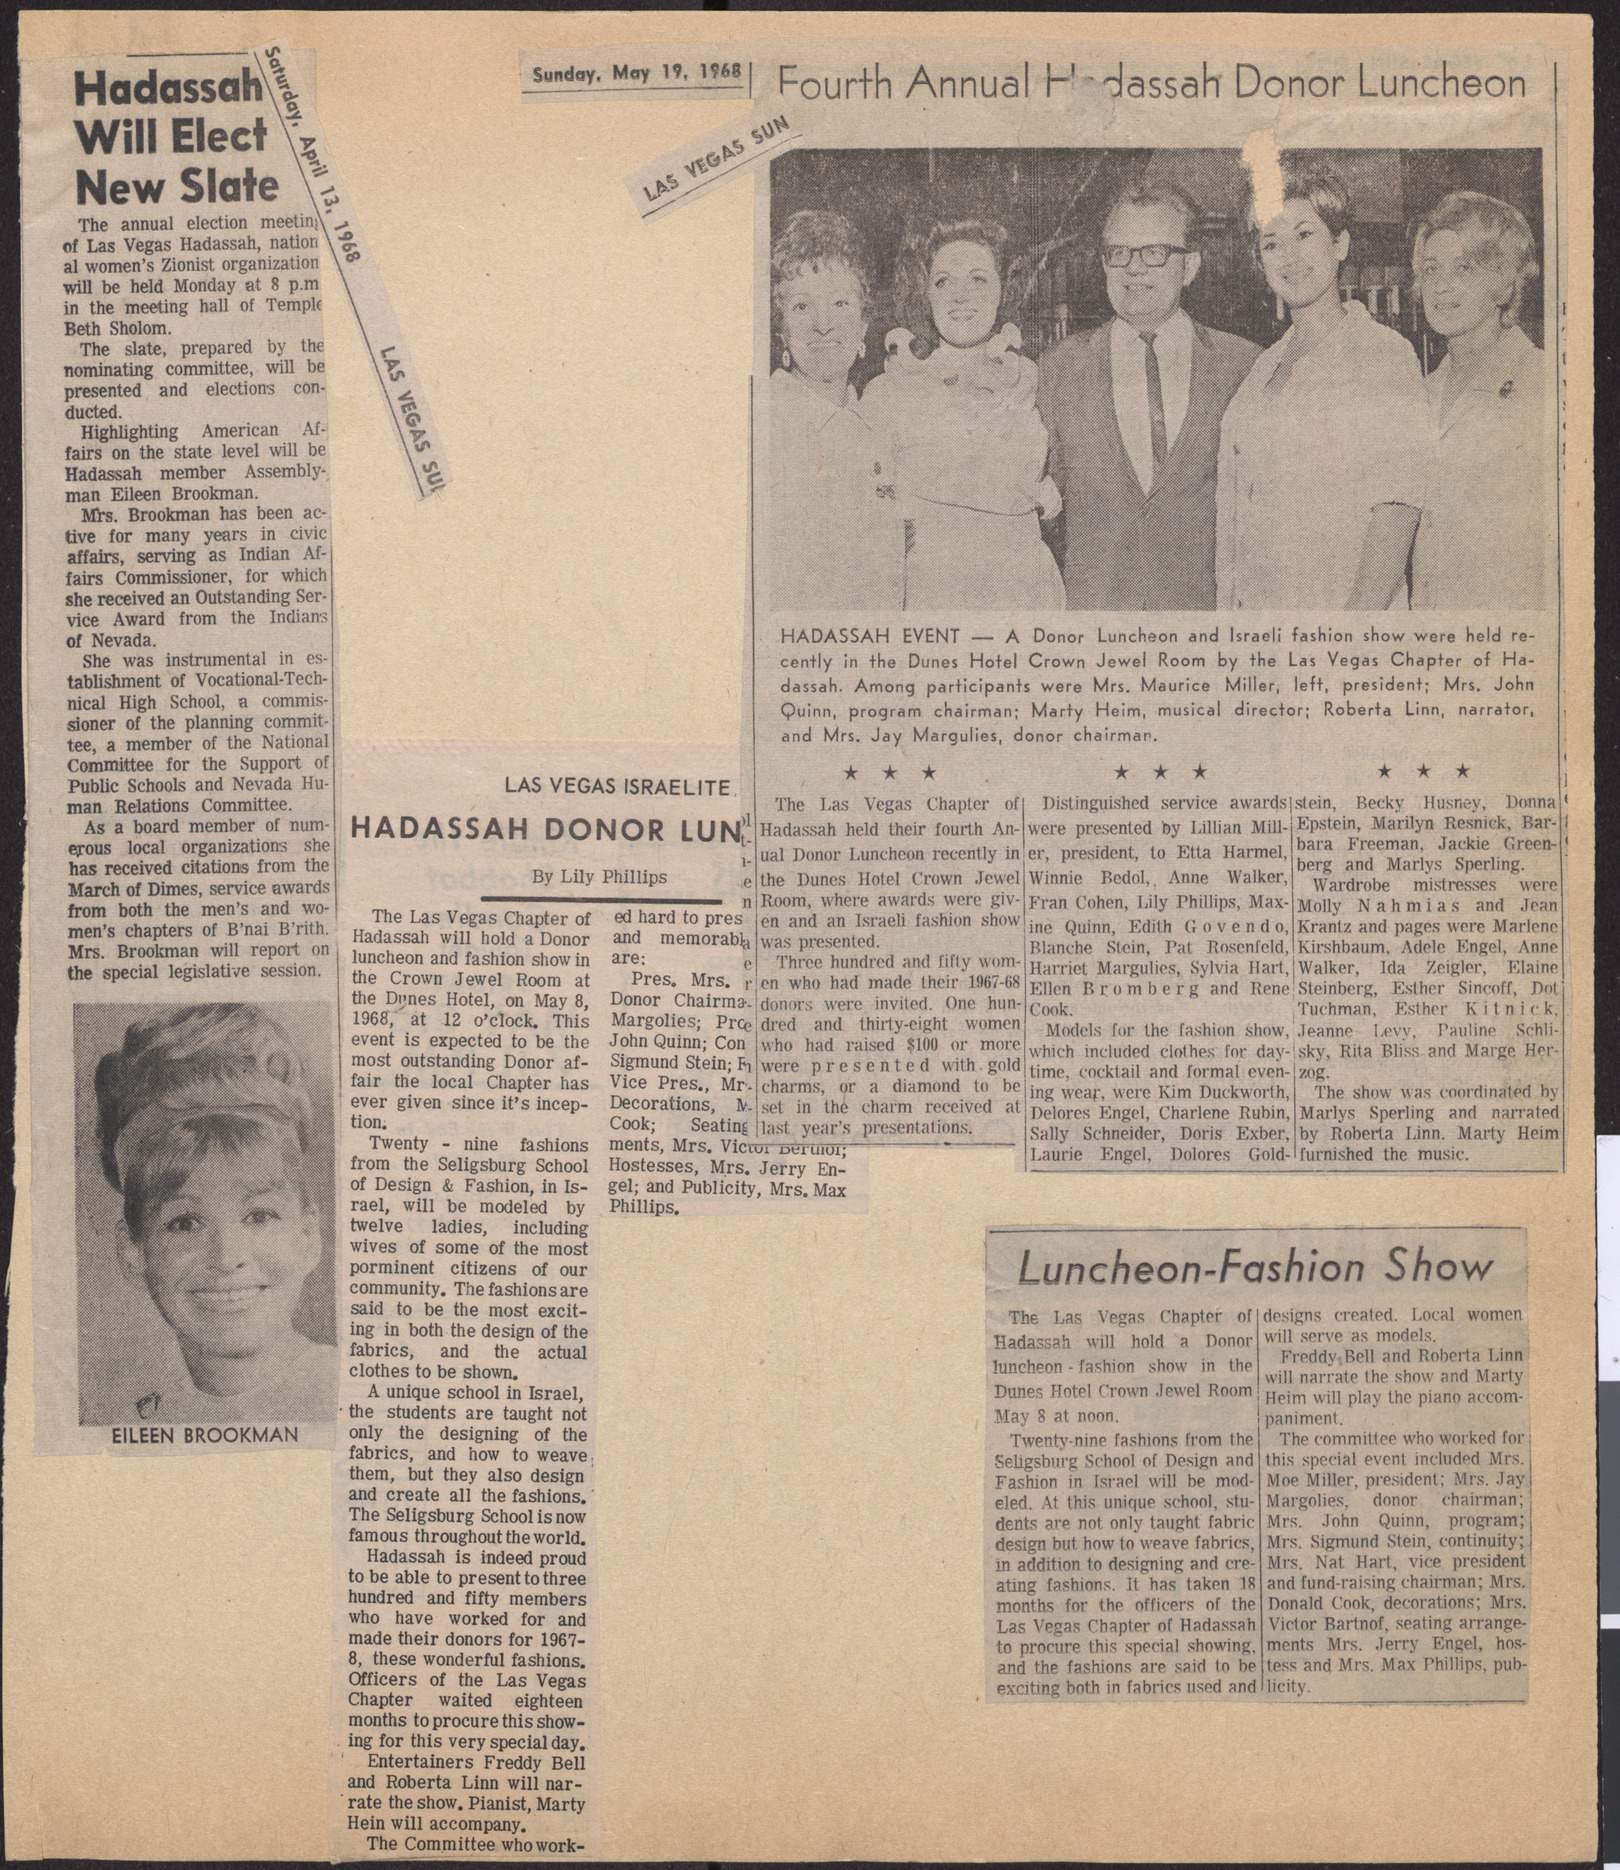 Newspaper clippings about Hadassah elections and donor luncheon and fashion show, 1968